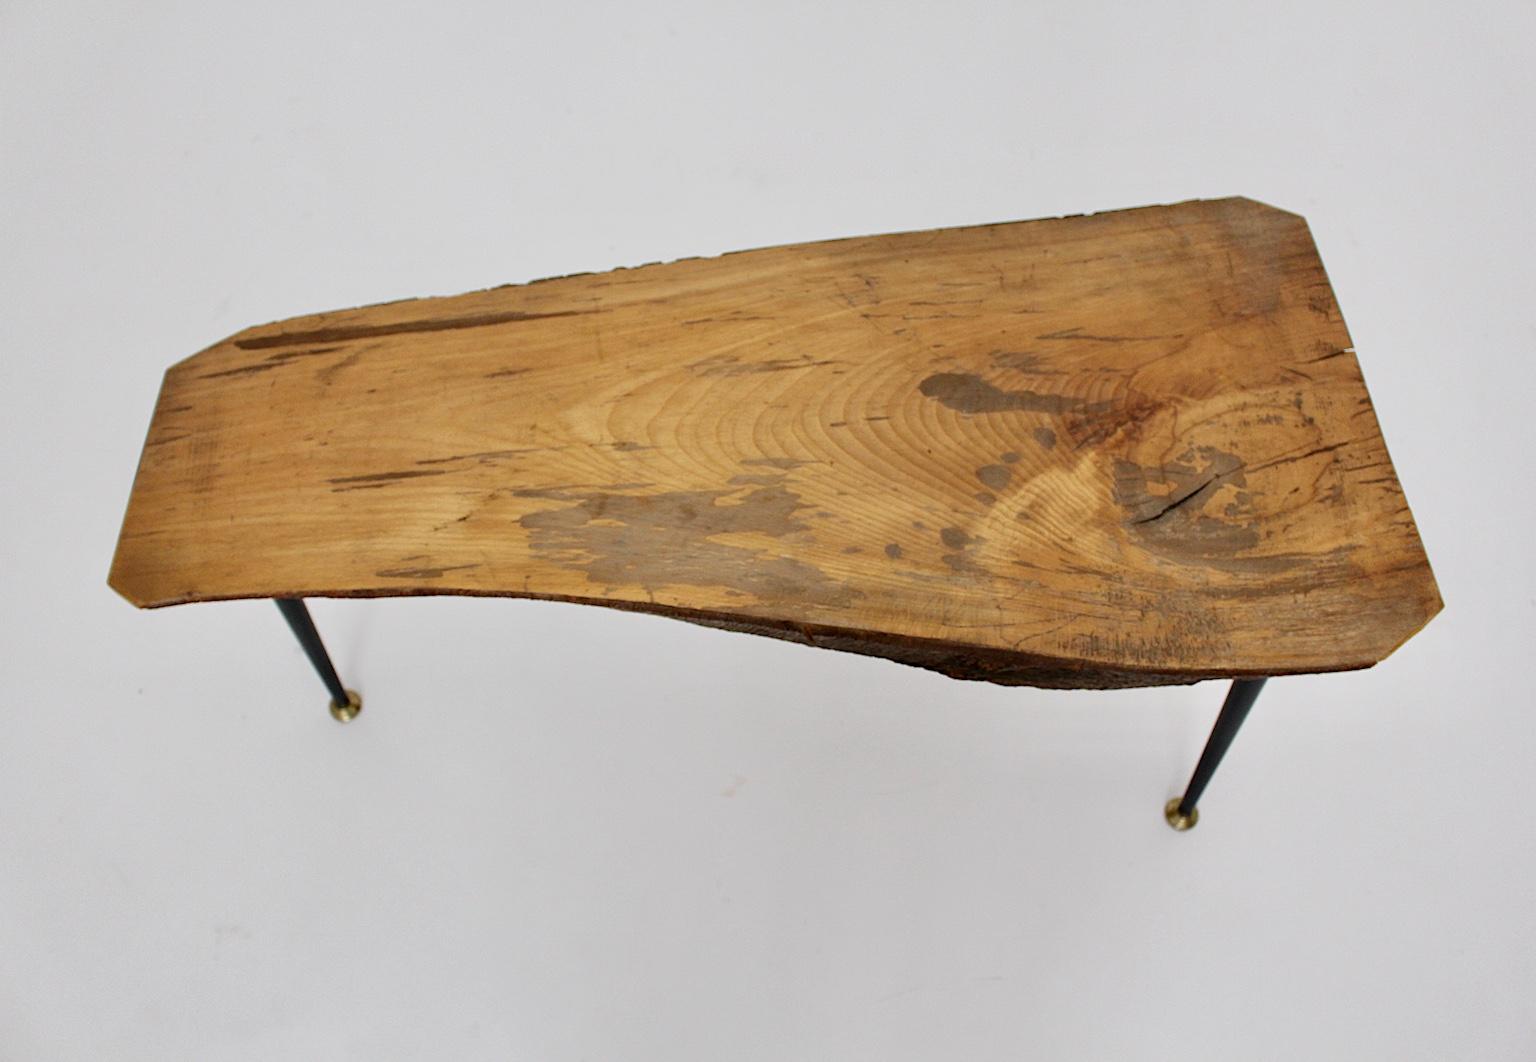 Mid Century Modern Vintage tree trunk coffee table, Austria 1950s.
A solid Vintage cherry wood tree trunk table, which shows three black lacquered metal feet with brass sabots.
The table was made in Austria in the 1950s.
The vintage condition is